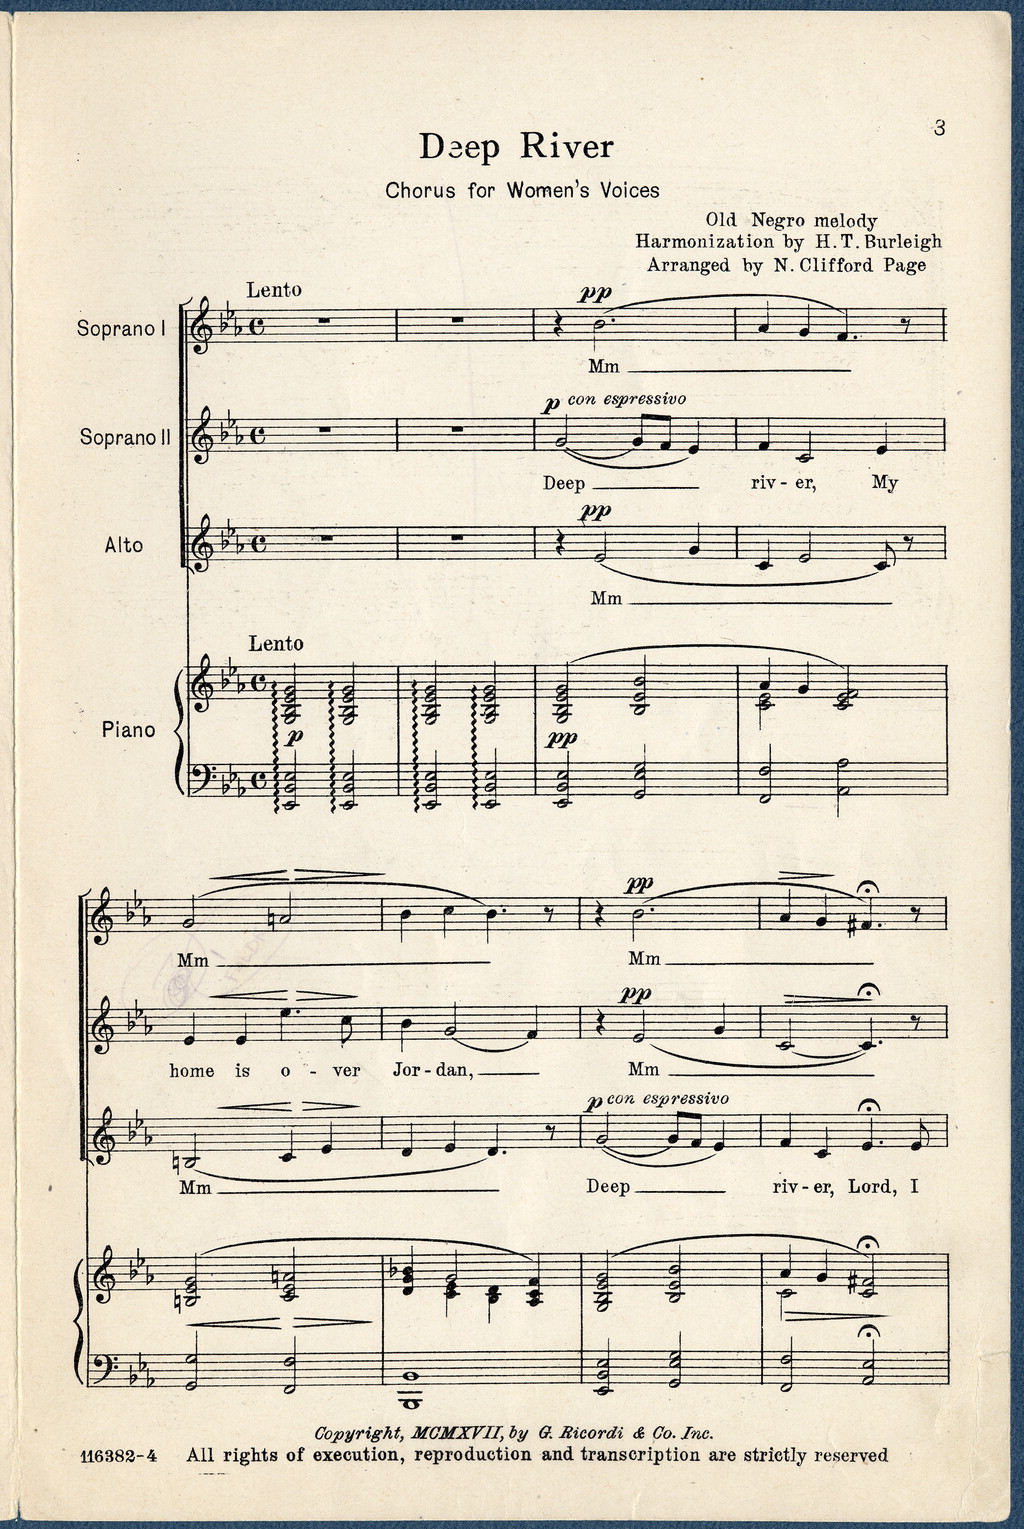 Deep River sheet music |  Photo courtesy of the Library of Congress